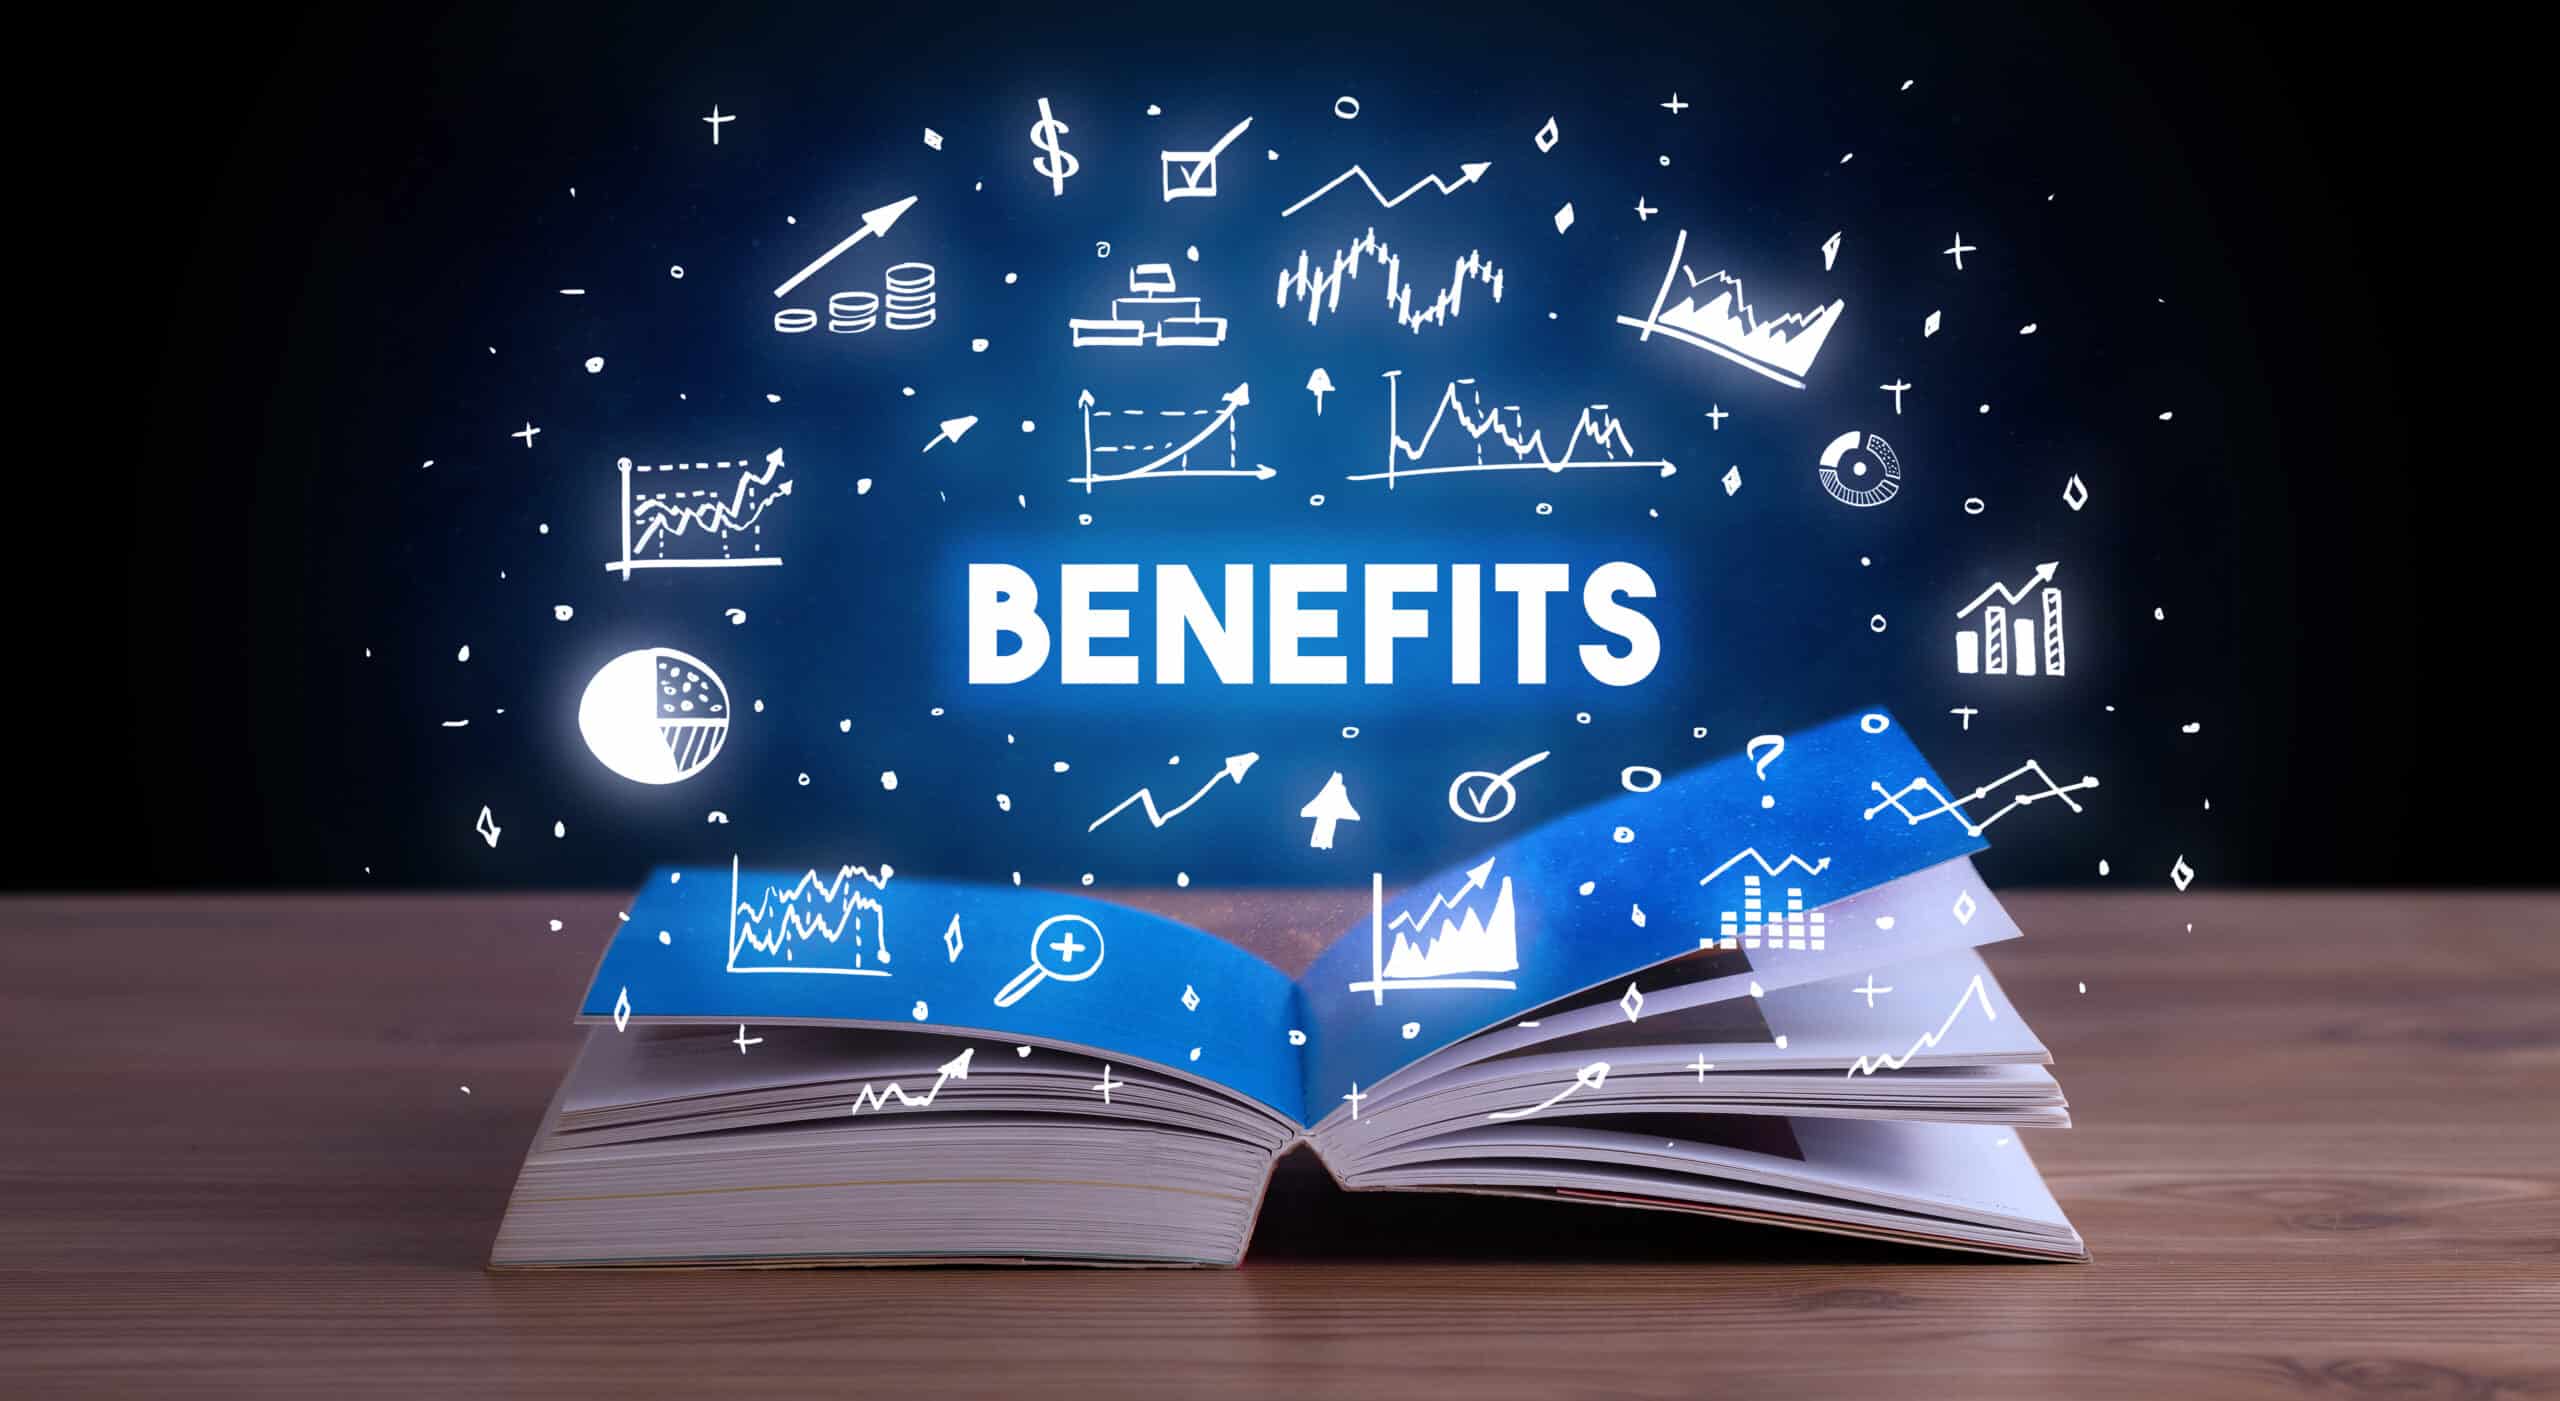 A report with the word “Benefits” in VR representing the business benefits of Salesforce ALM.